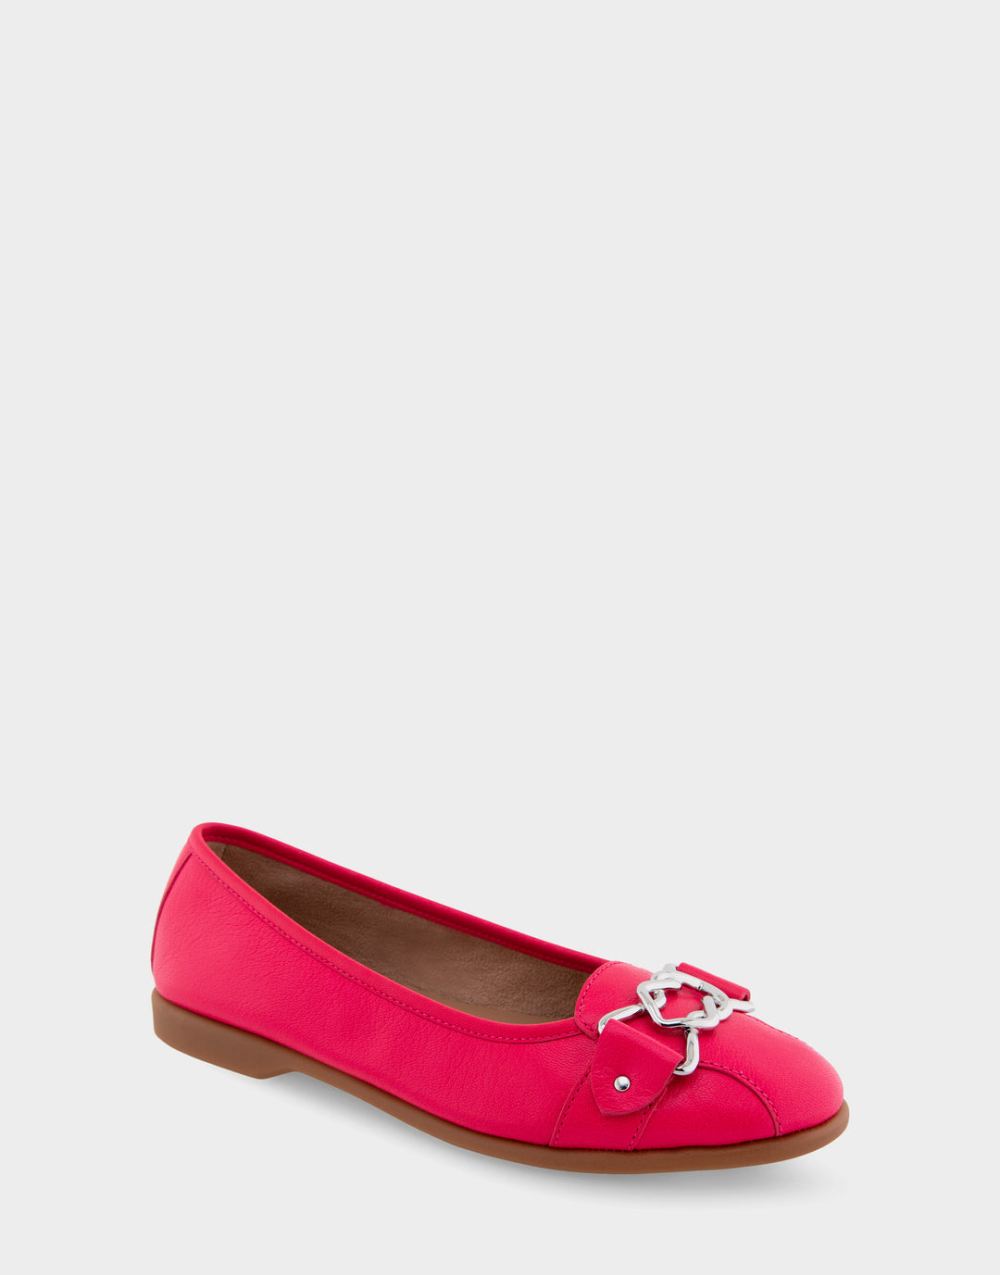 Women's | Bia Virtual Pink Leather Ornamented Flat